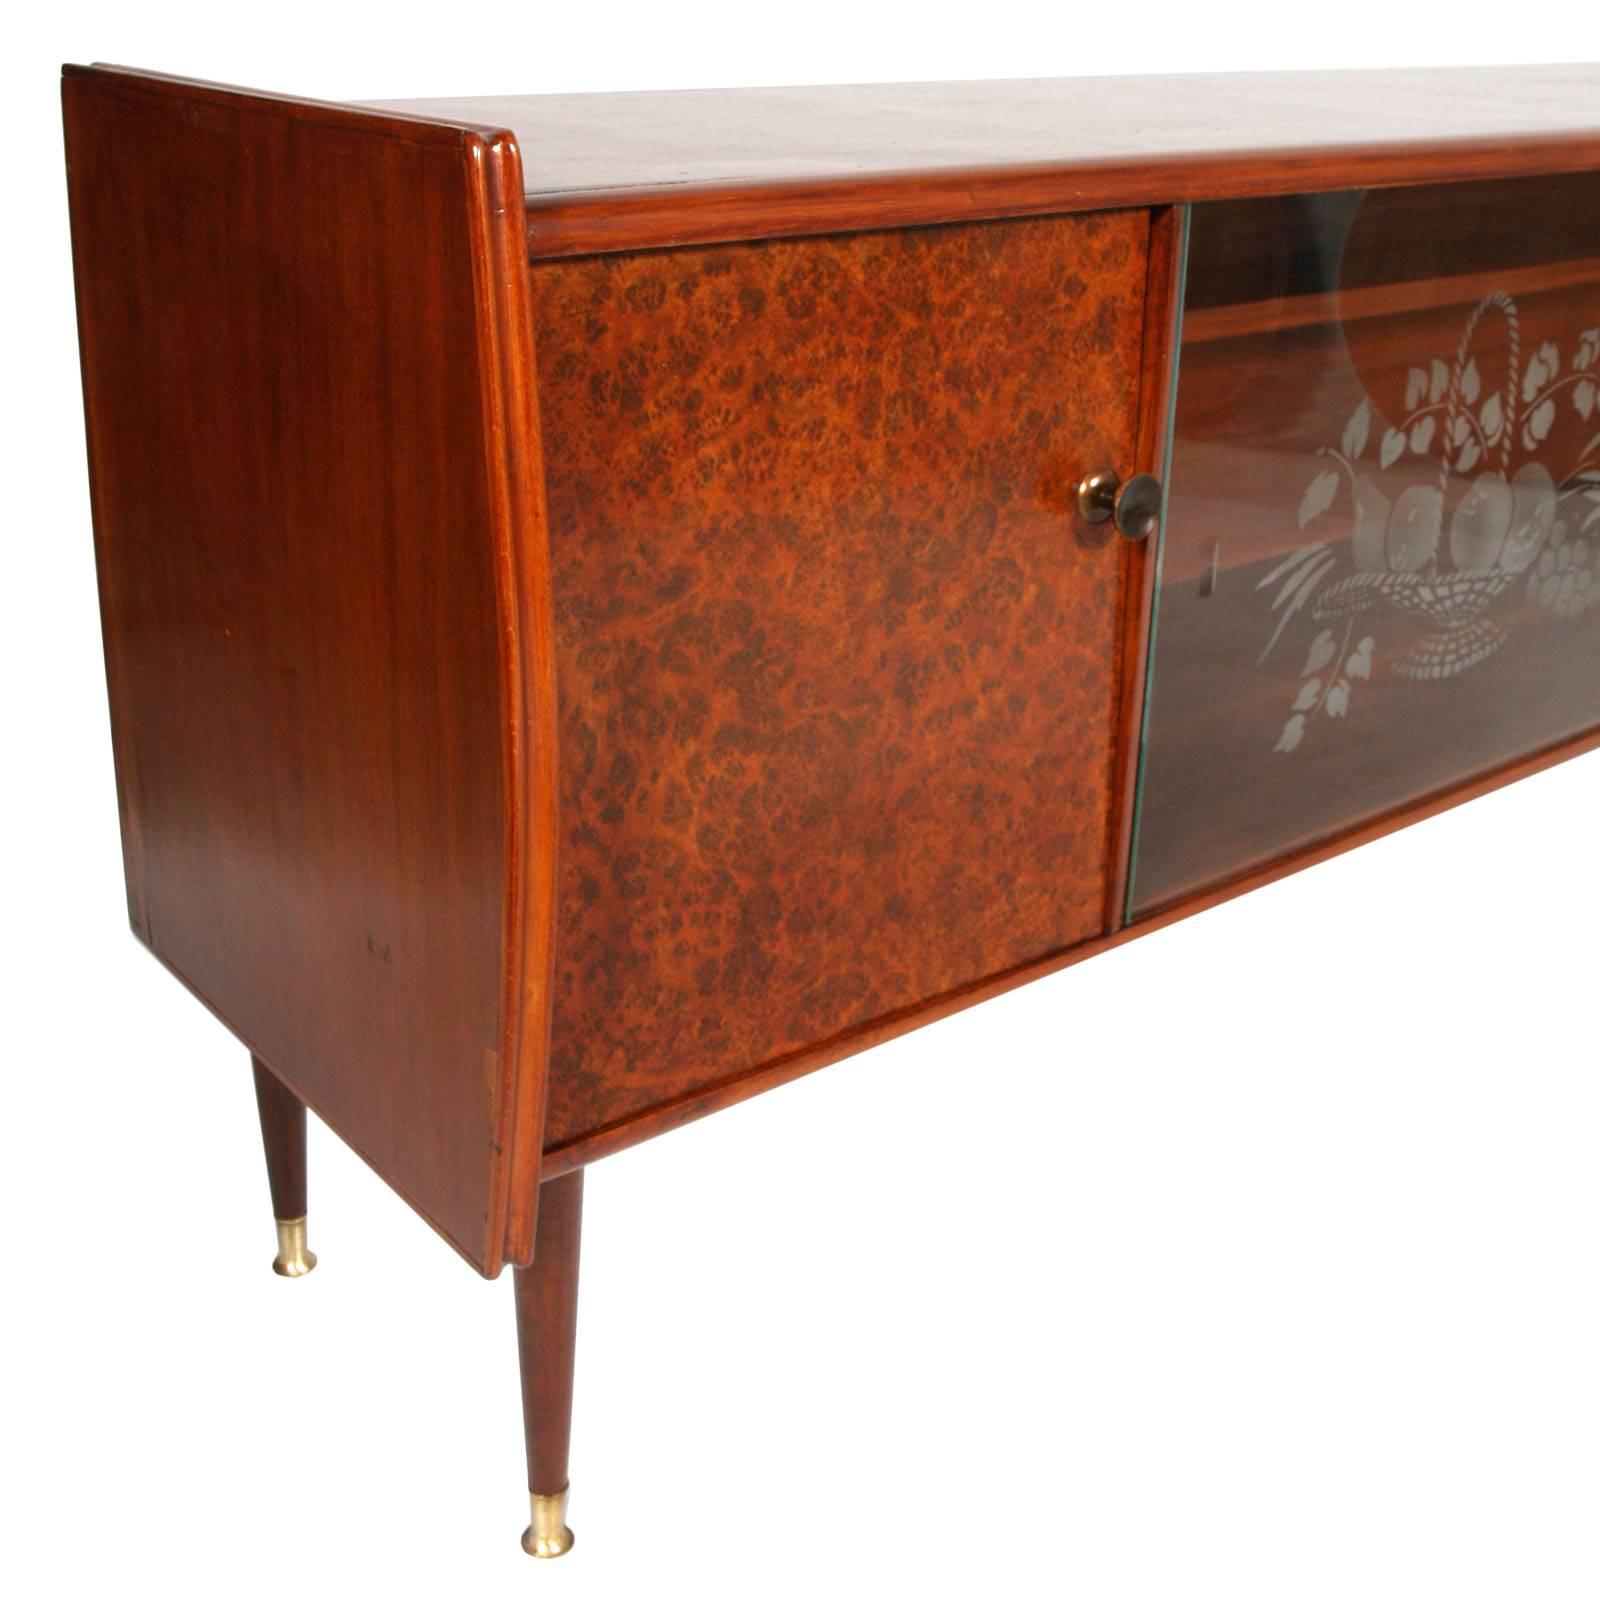 Gilt Midcentury Cabinet Art Deco from Lissone, Made in Milan, Gio Ponti Style For Sale